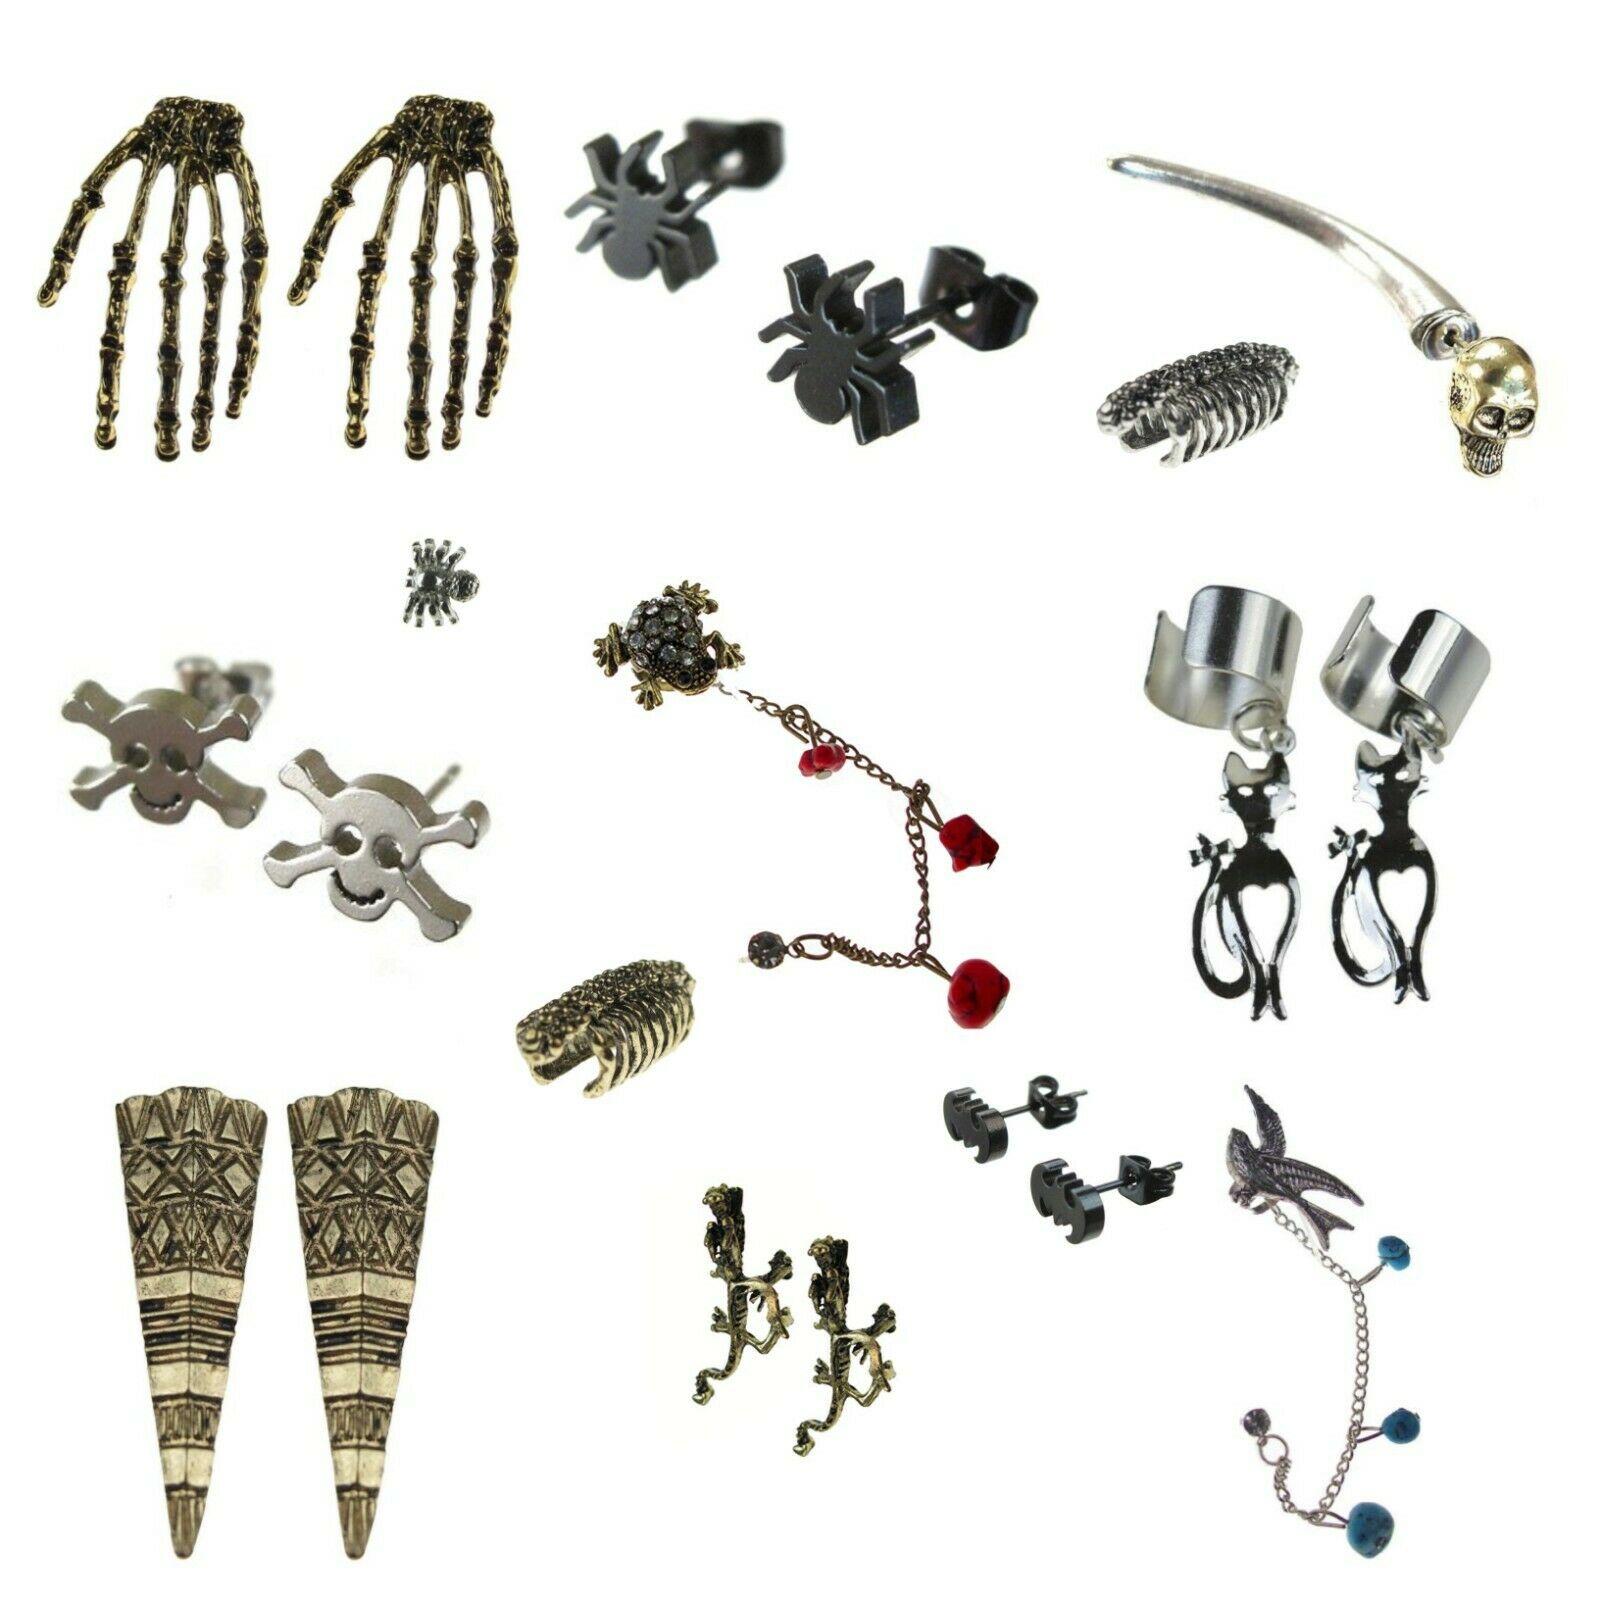 Joblot Of 100 Halloween Gothic, Emo Ear Cuffs & Earrings (60 Singles, 40 Pairs)